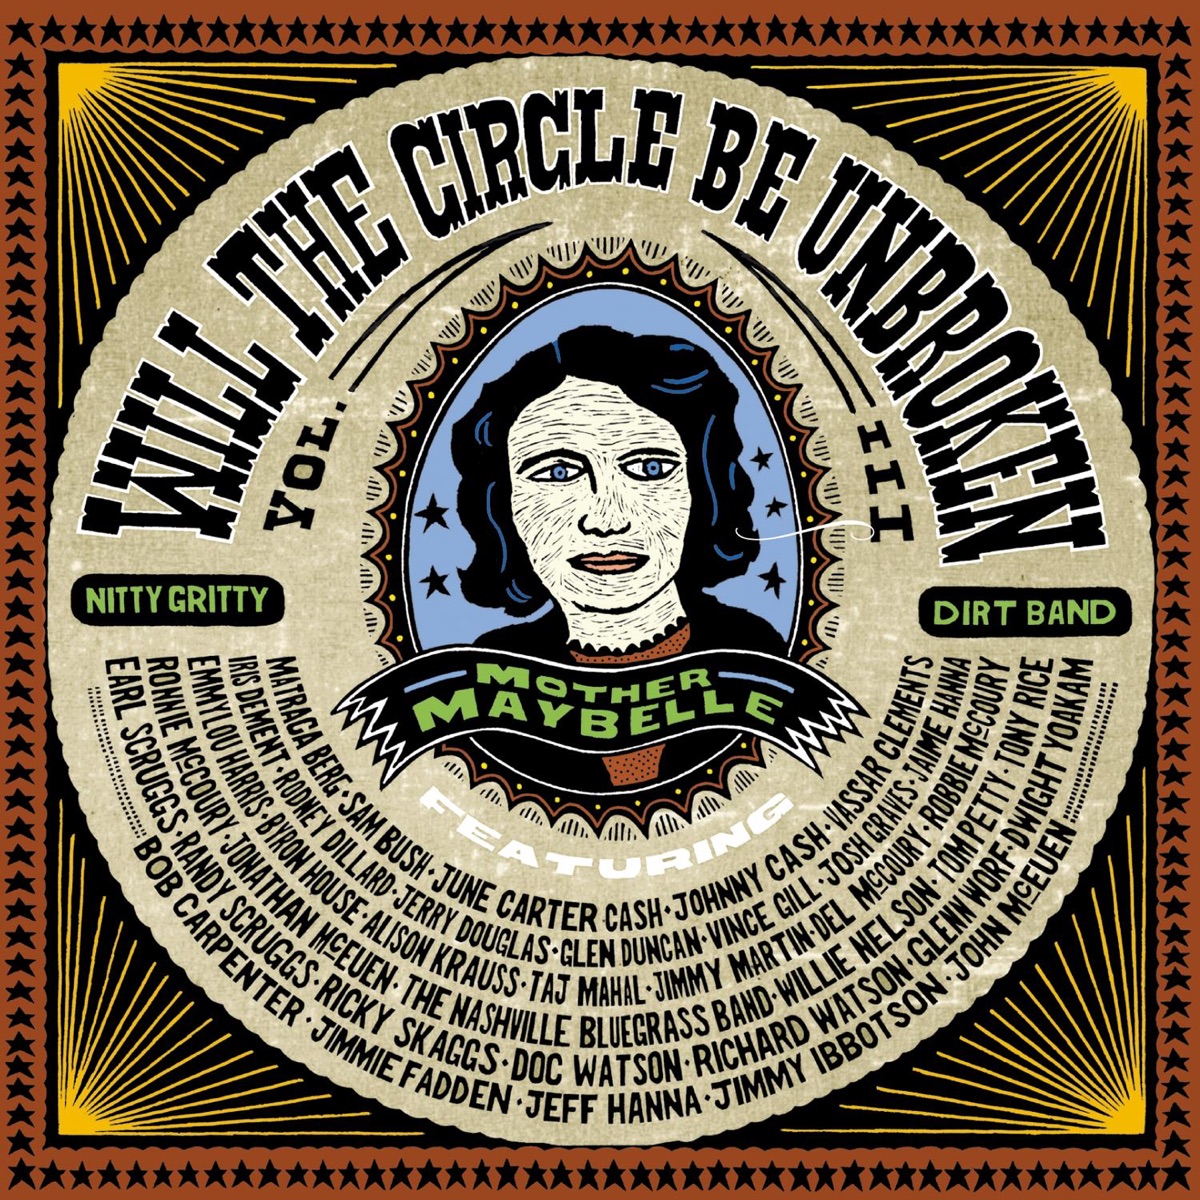 Will the Circle Be Unbroken - Album by Nitty Gritty Dirt Band - Apple Music